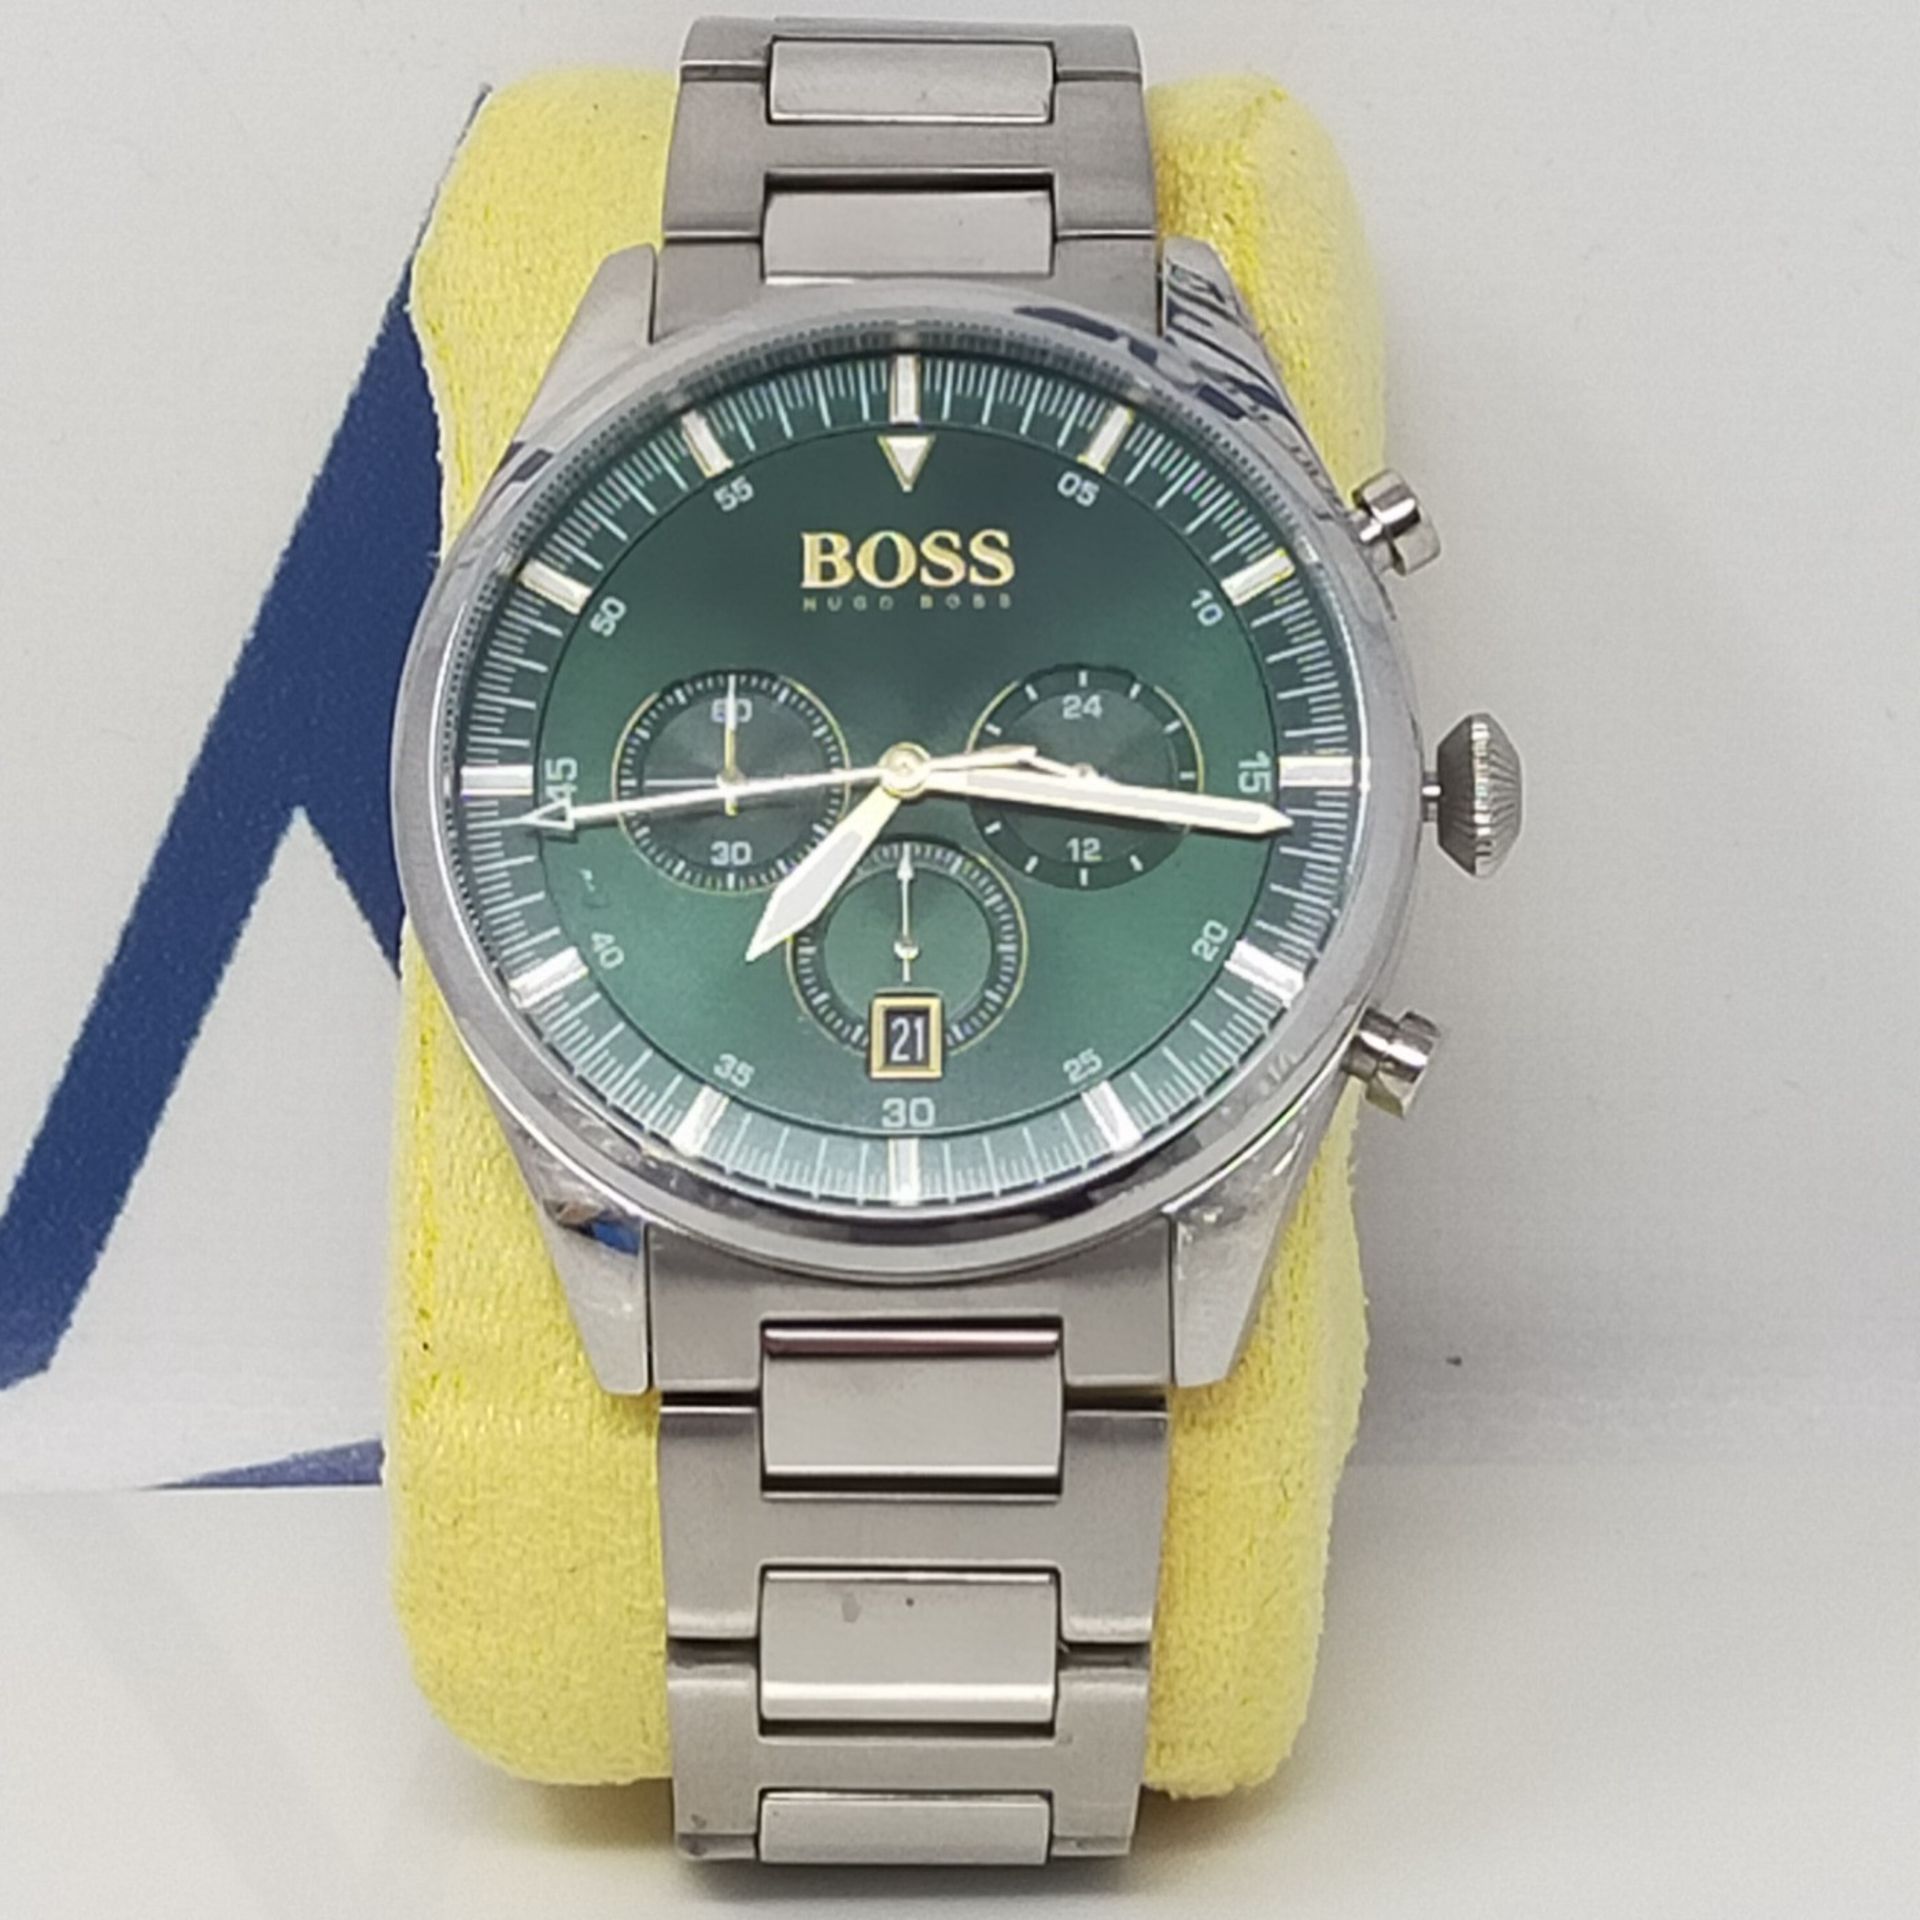 RRP £273.00 BOSS Men's Analog Quartz Watch with Stainless Steel Strap 1513868 - Image 3 of 6